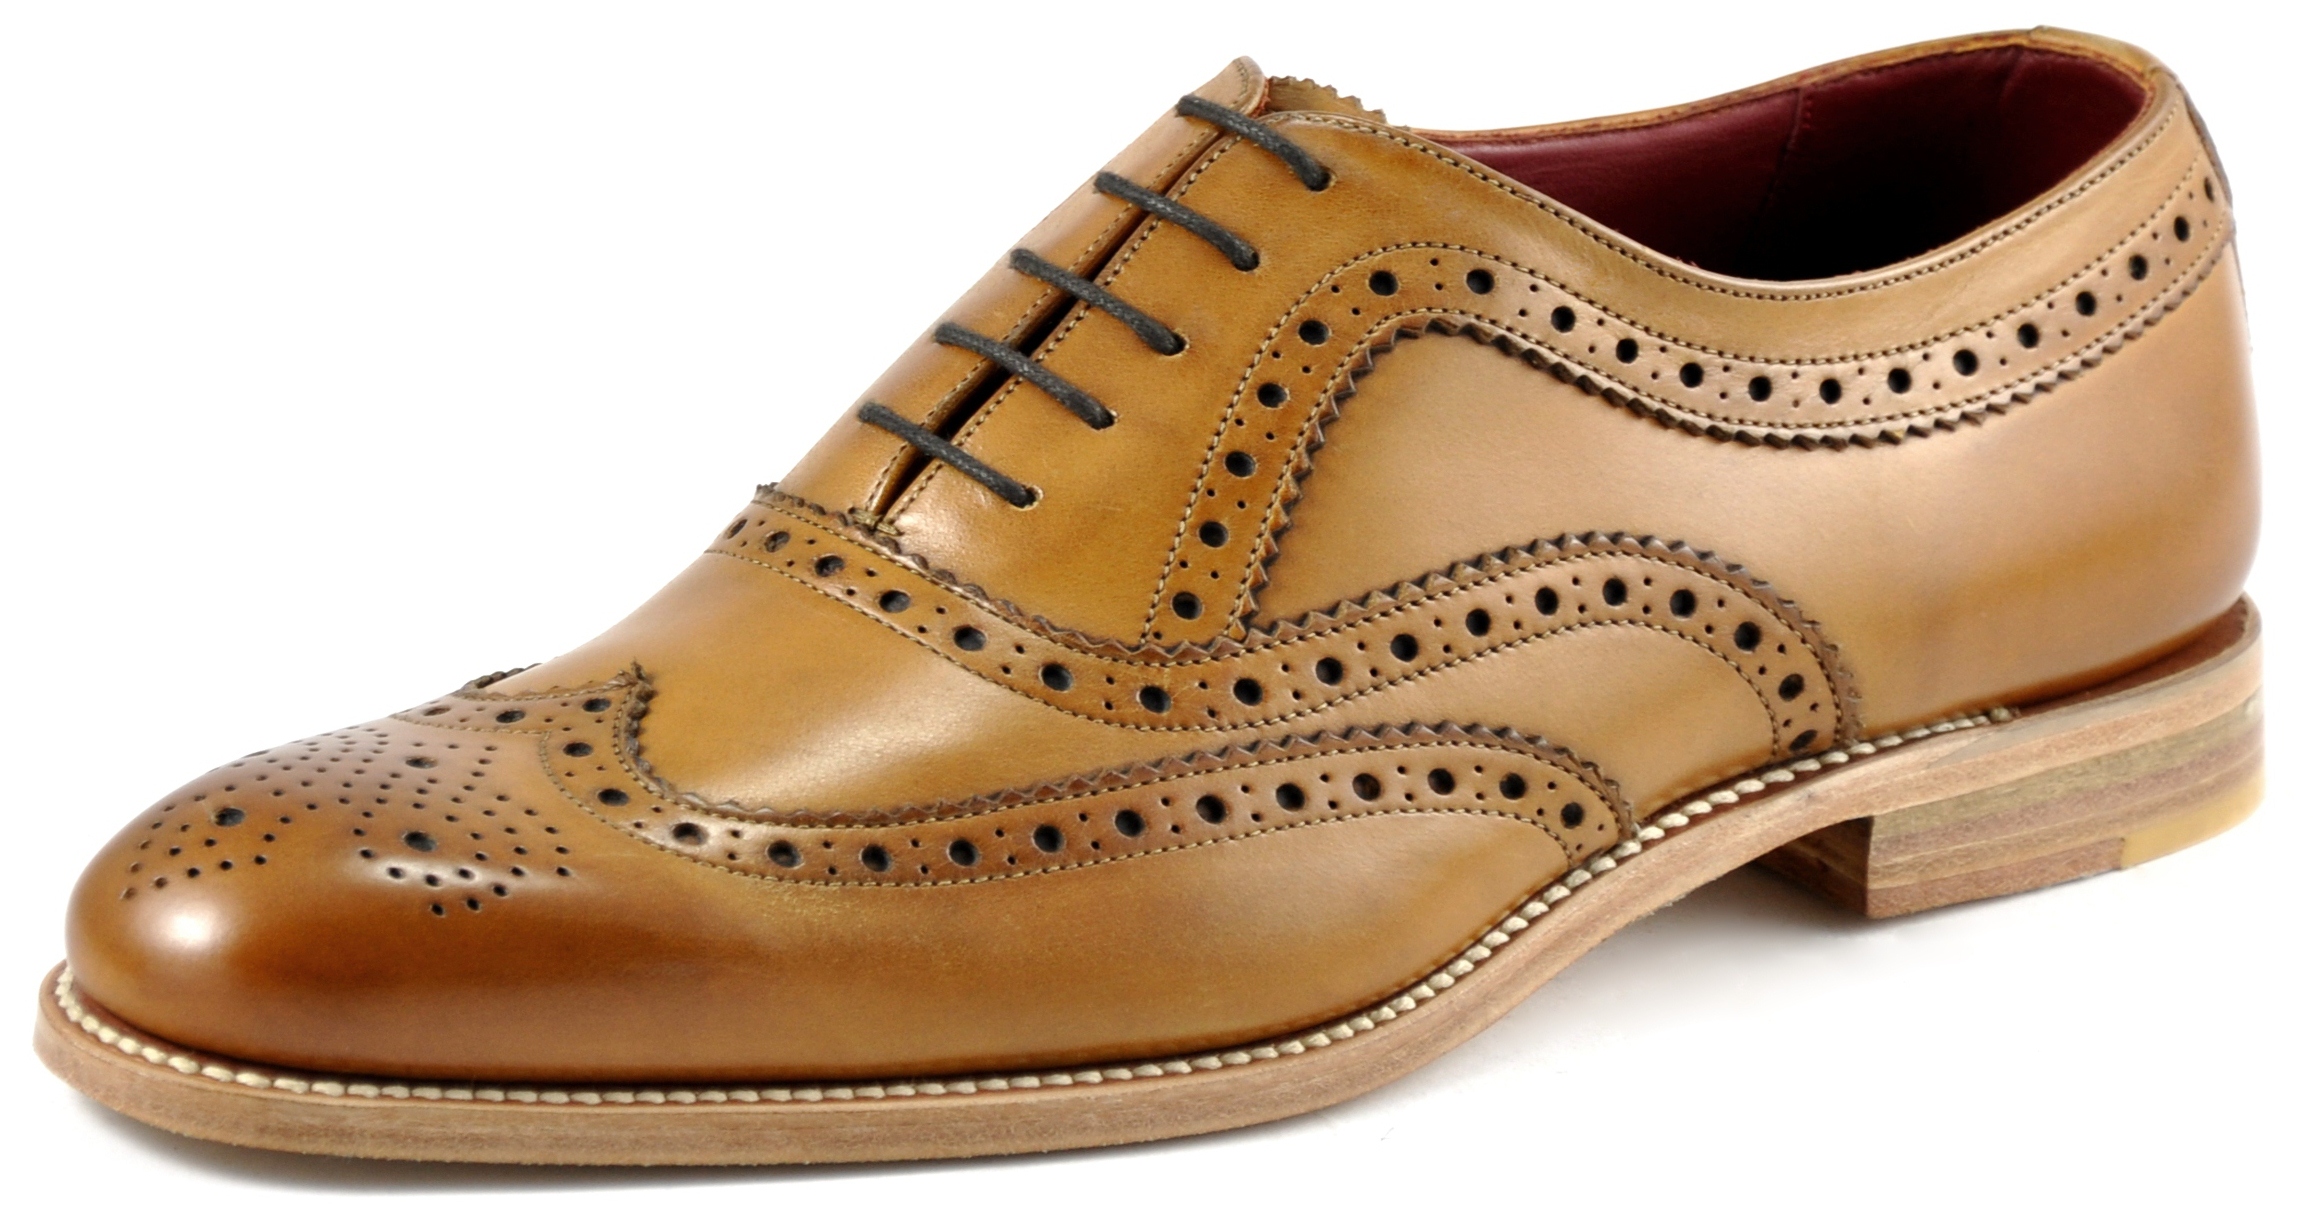 Stylish Brogue shoe featuring fine punched brogue detail and a Goodyear Welted sole, with a natural edge finish. Made by Loake Shoemakers